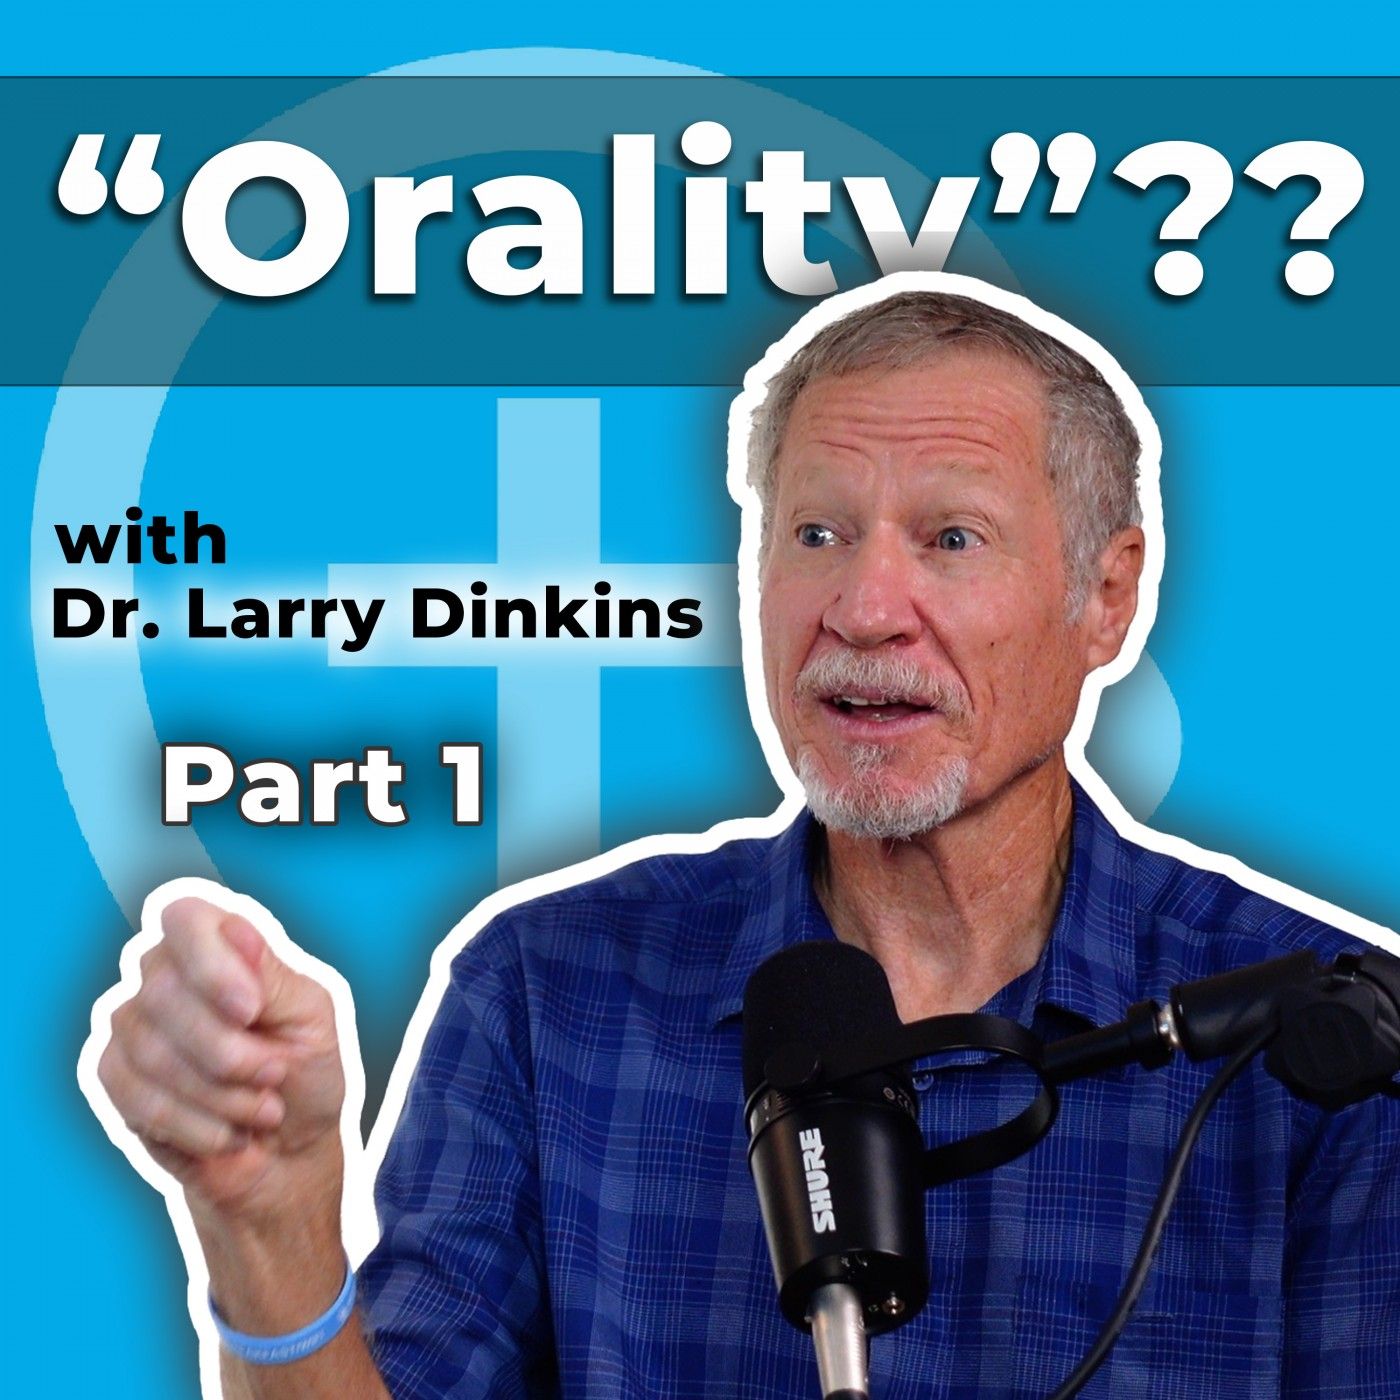 "Orality" vs Word-for-Word Bible Memory (Part 1)